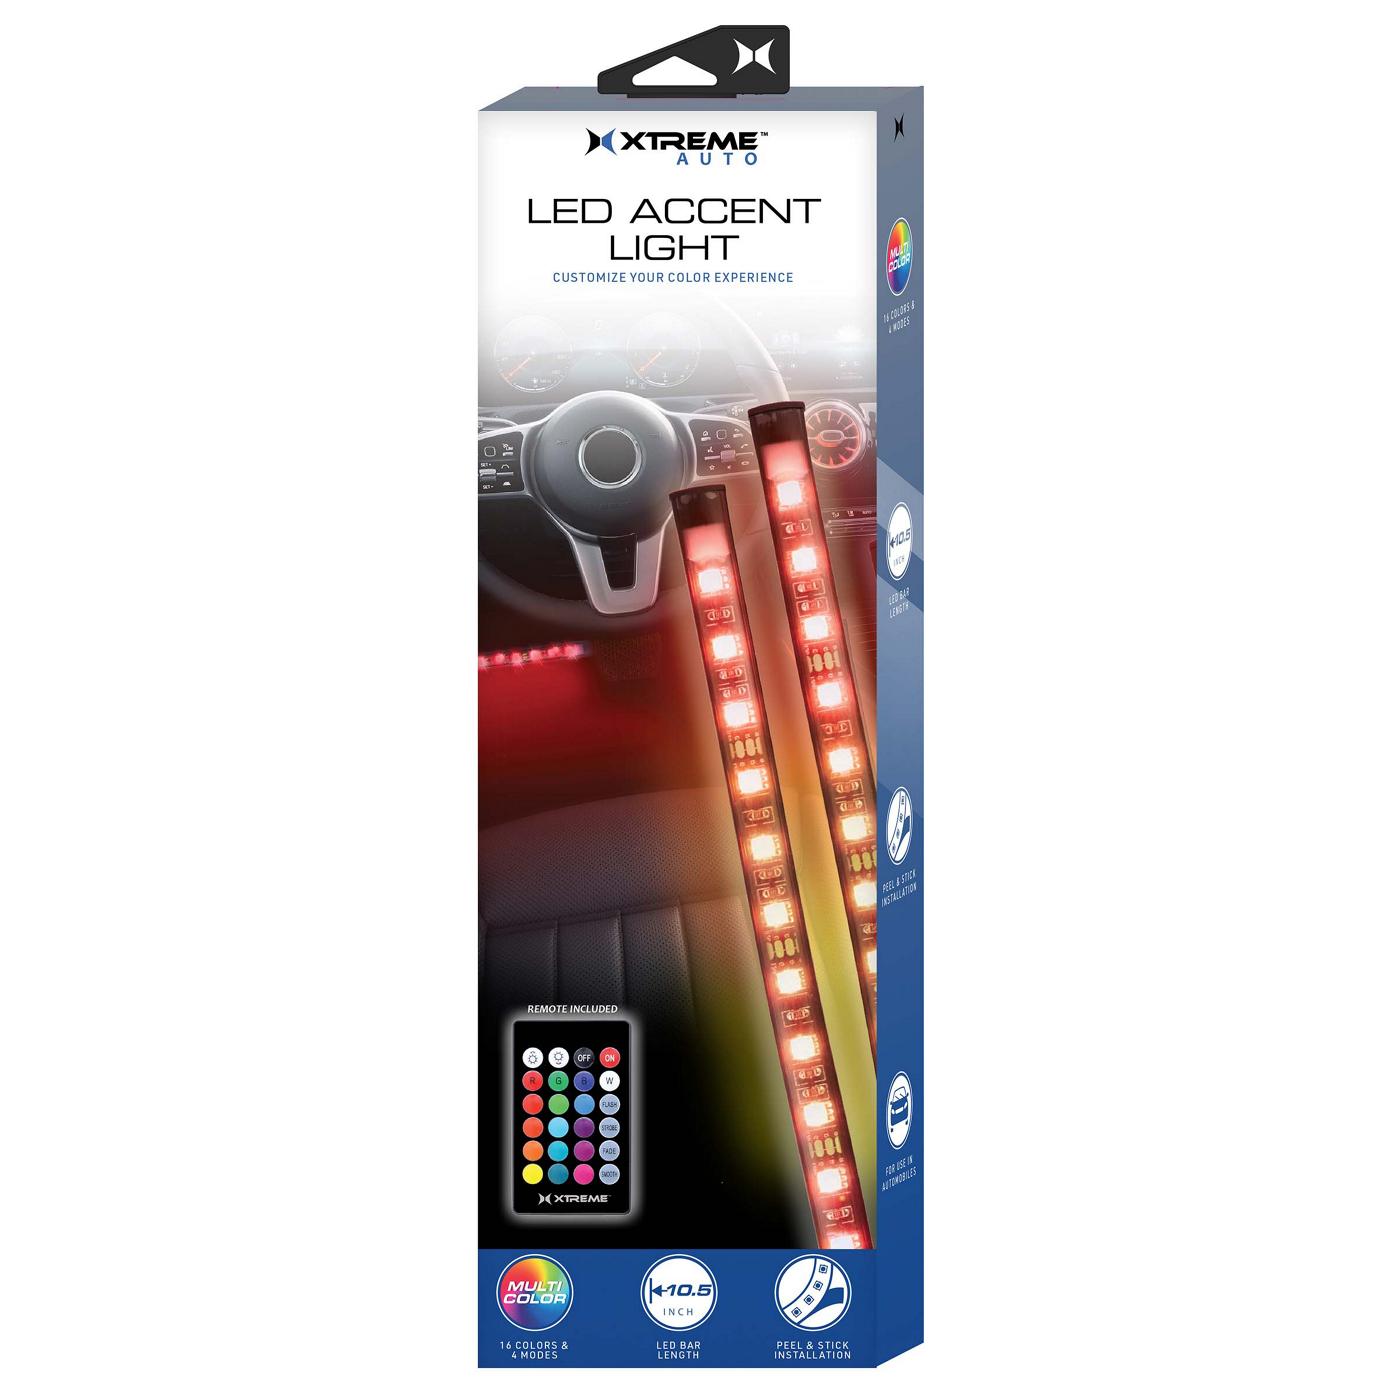 H-E-B LED Indoor/Outdoor Remote Control Strip Lights